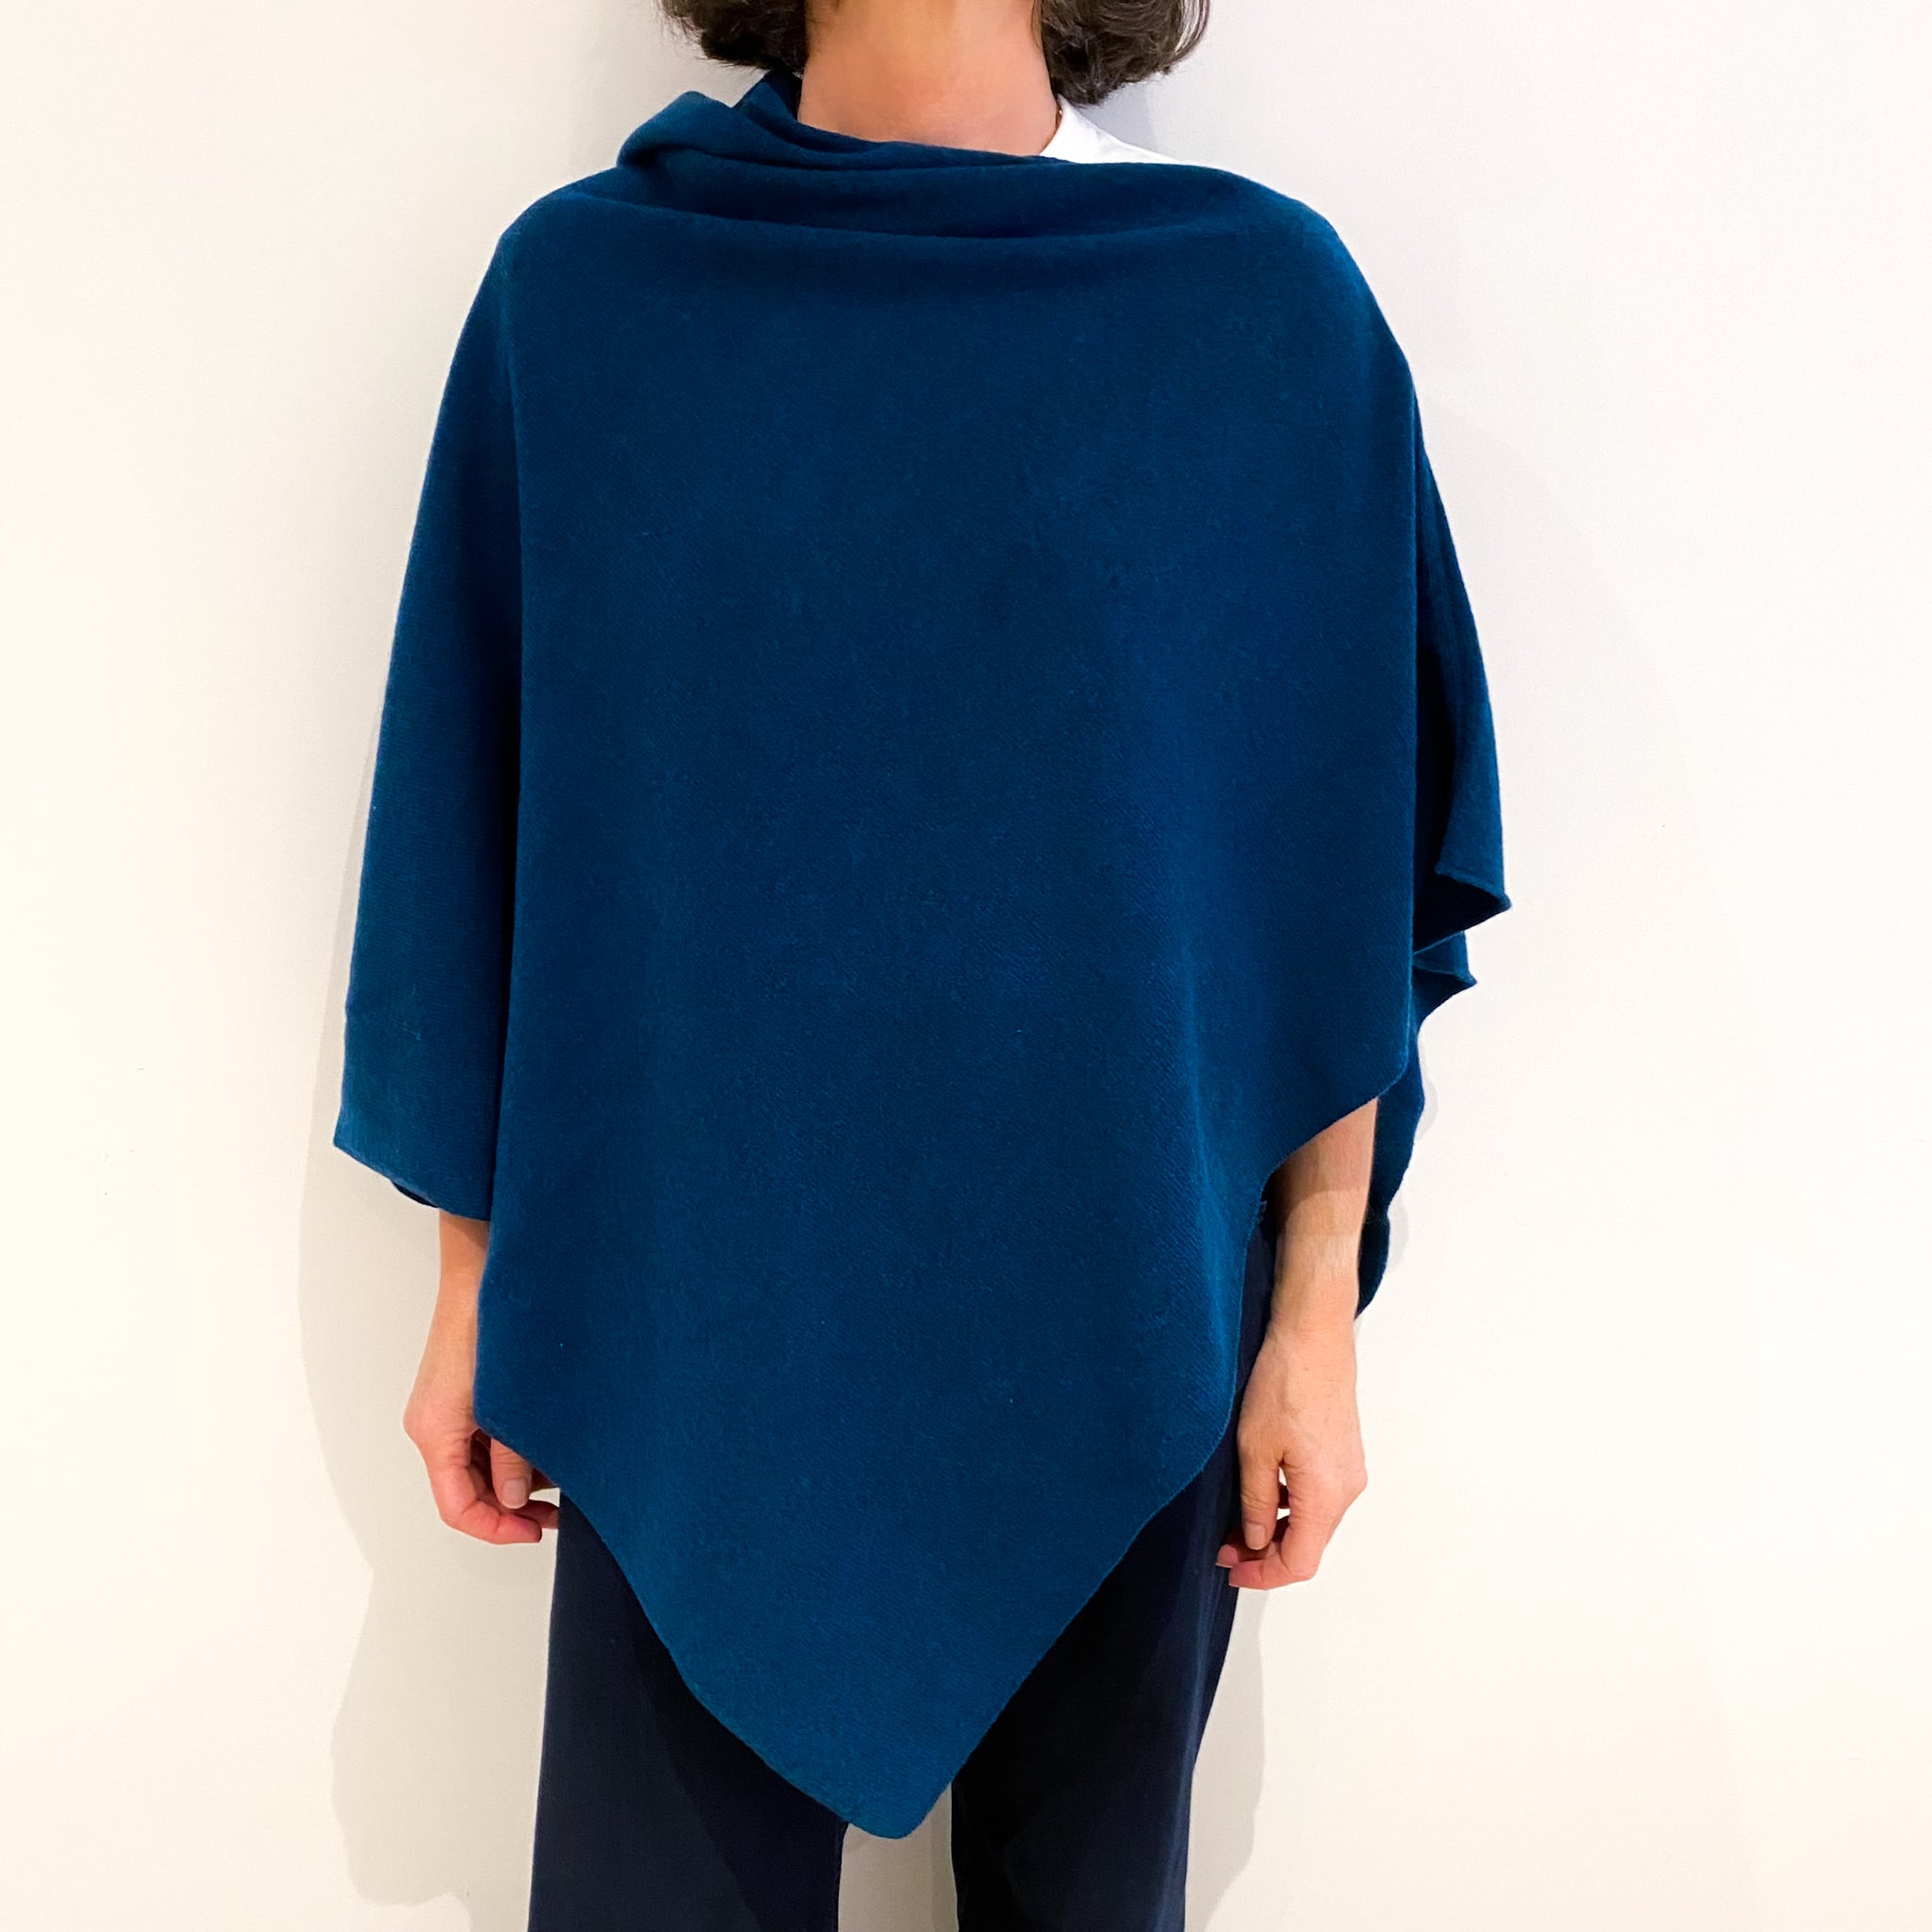 Brand New Scottish Peacock Blue Cashmere Poncho One Size